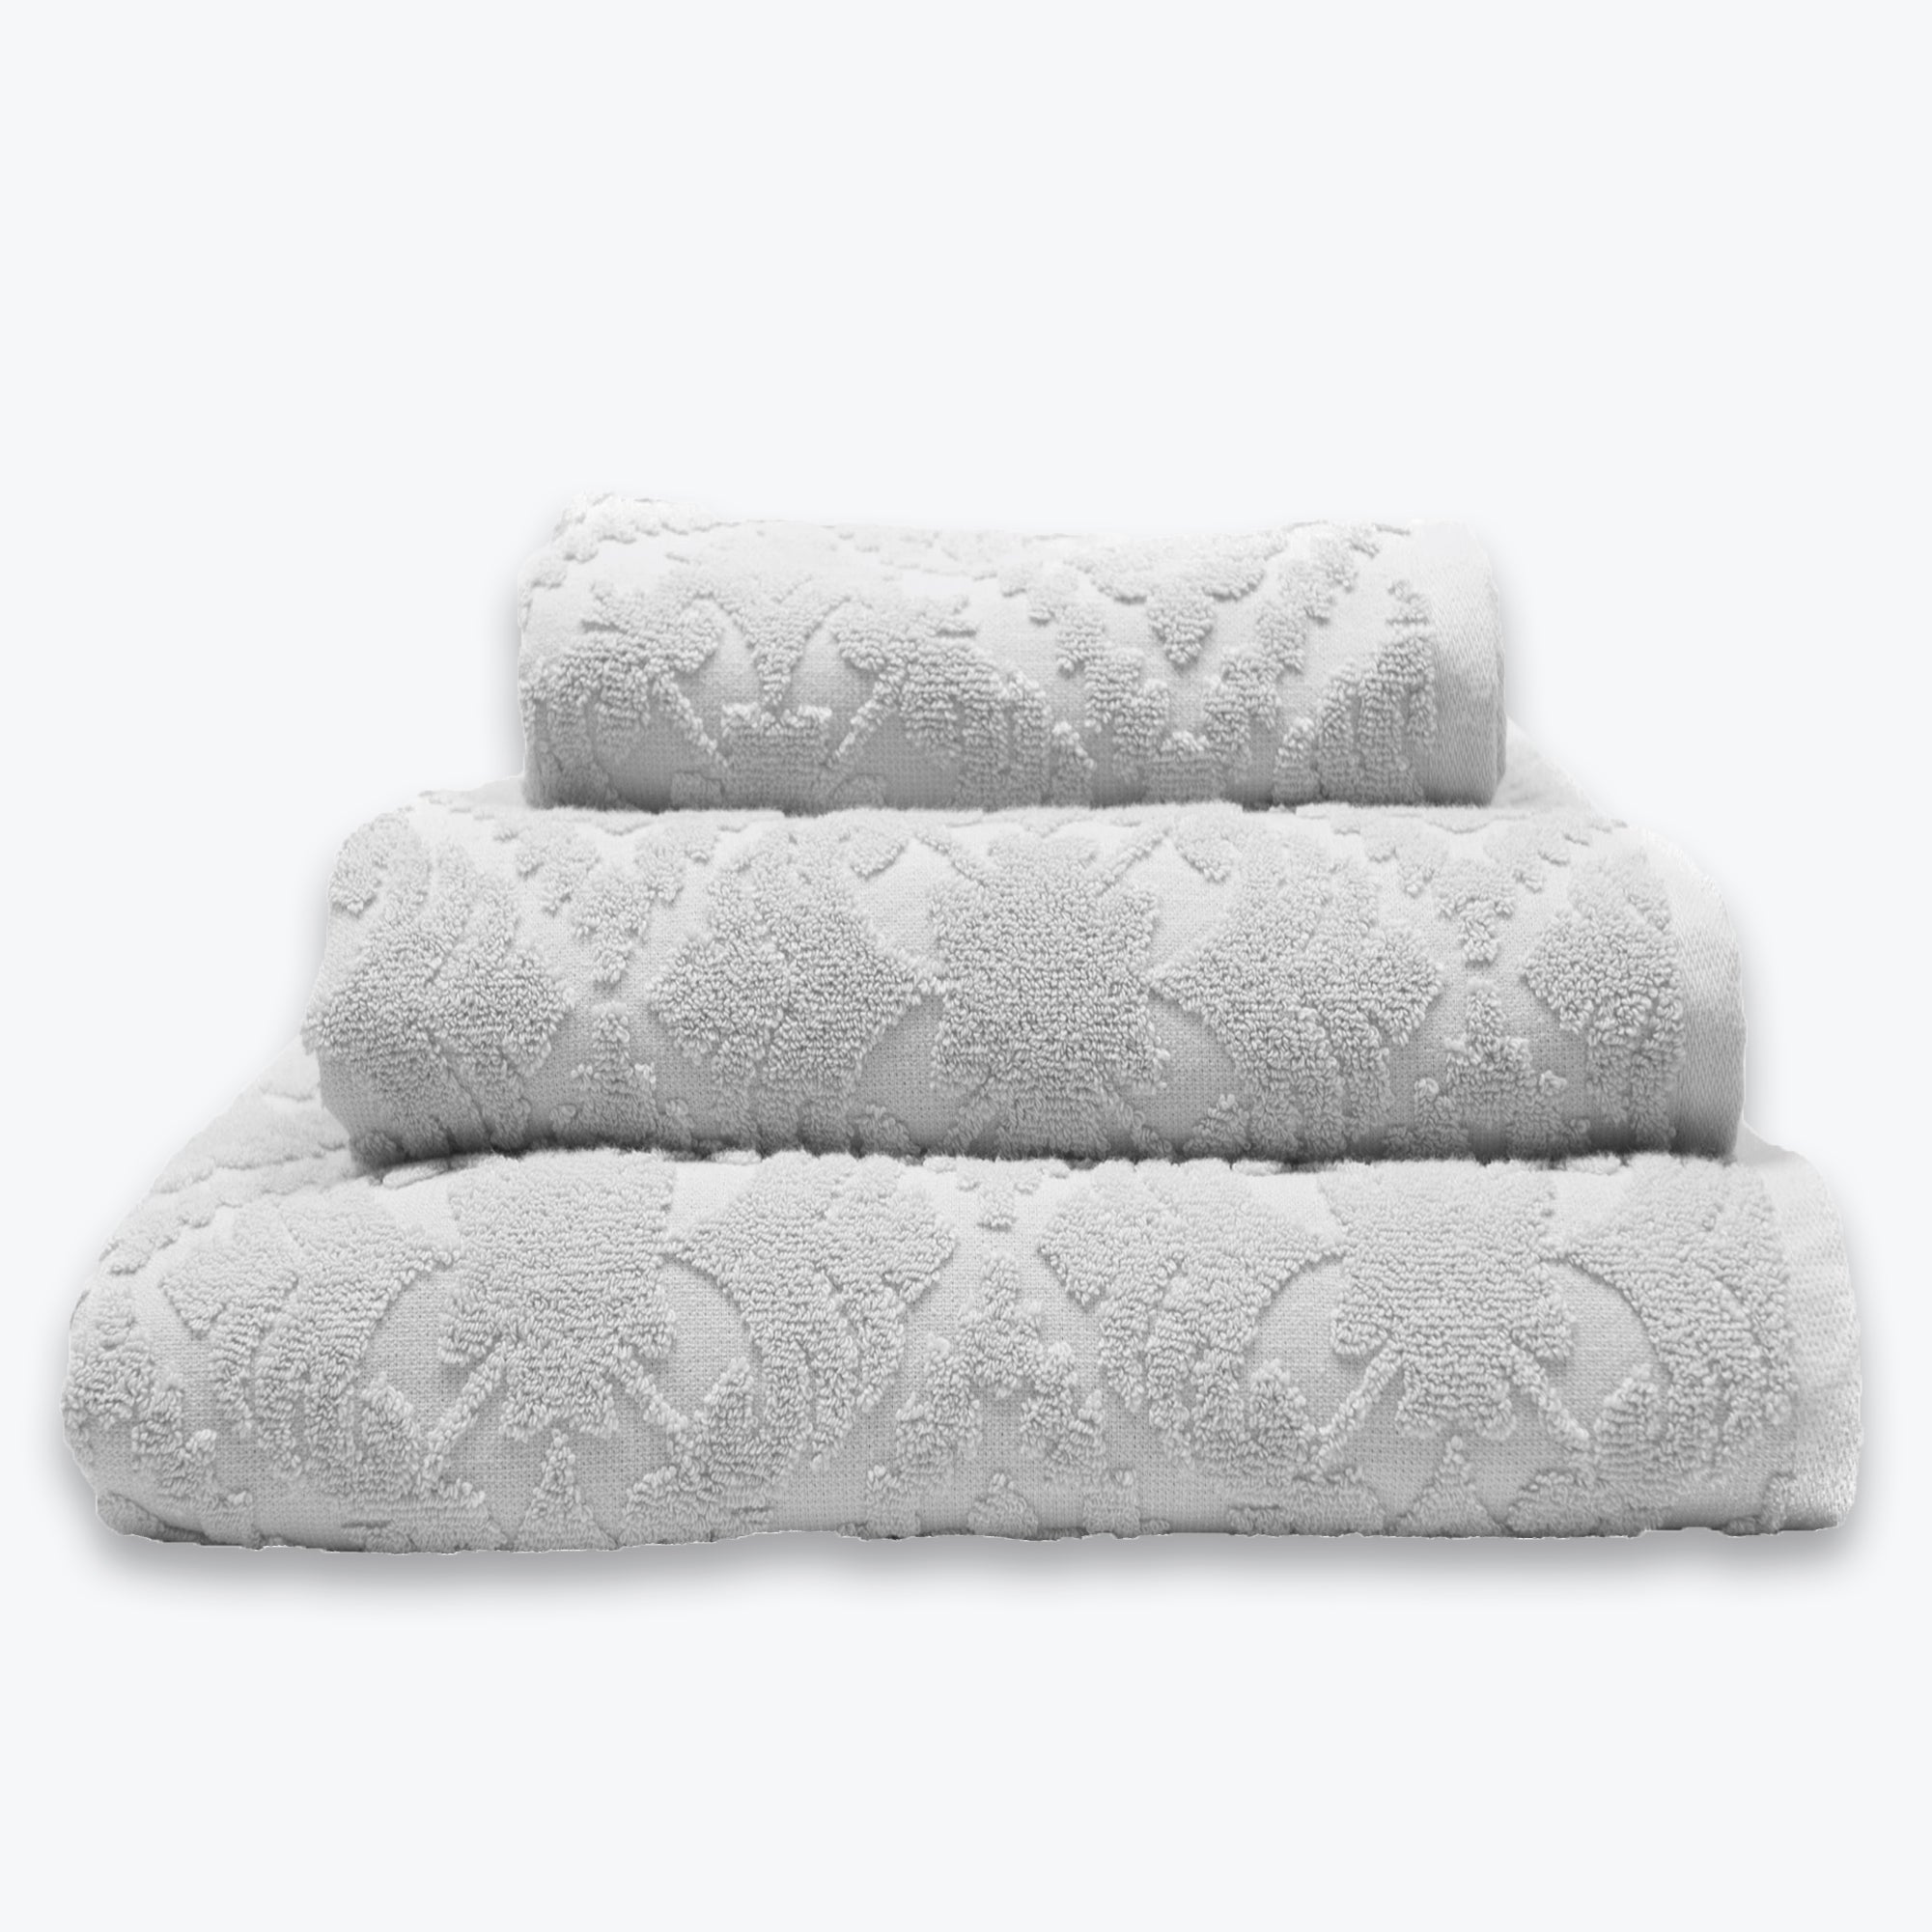 Dove Grey Country House Towel Set - Floral Textured Bathroom Towels